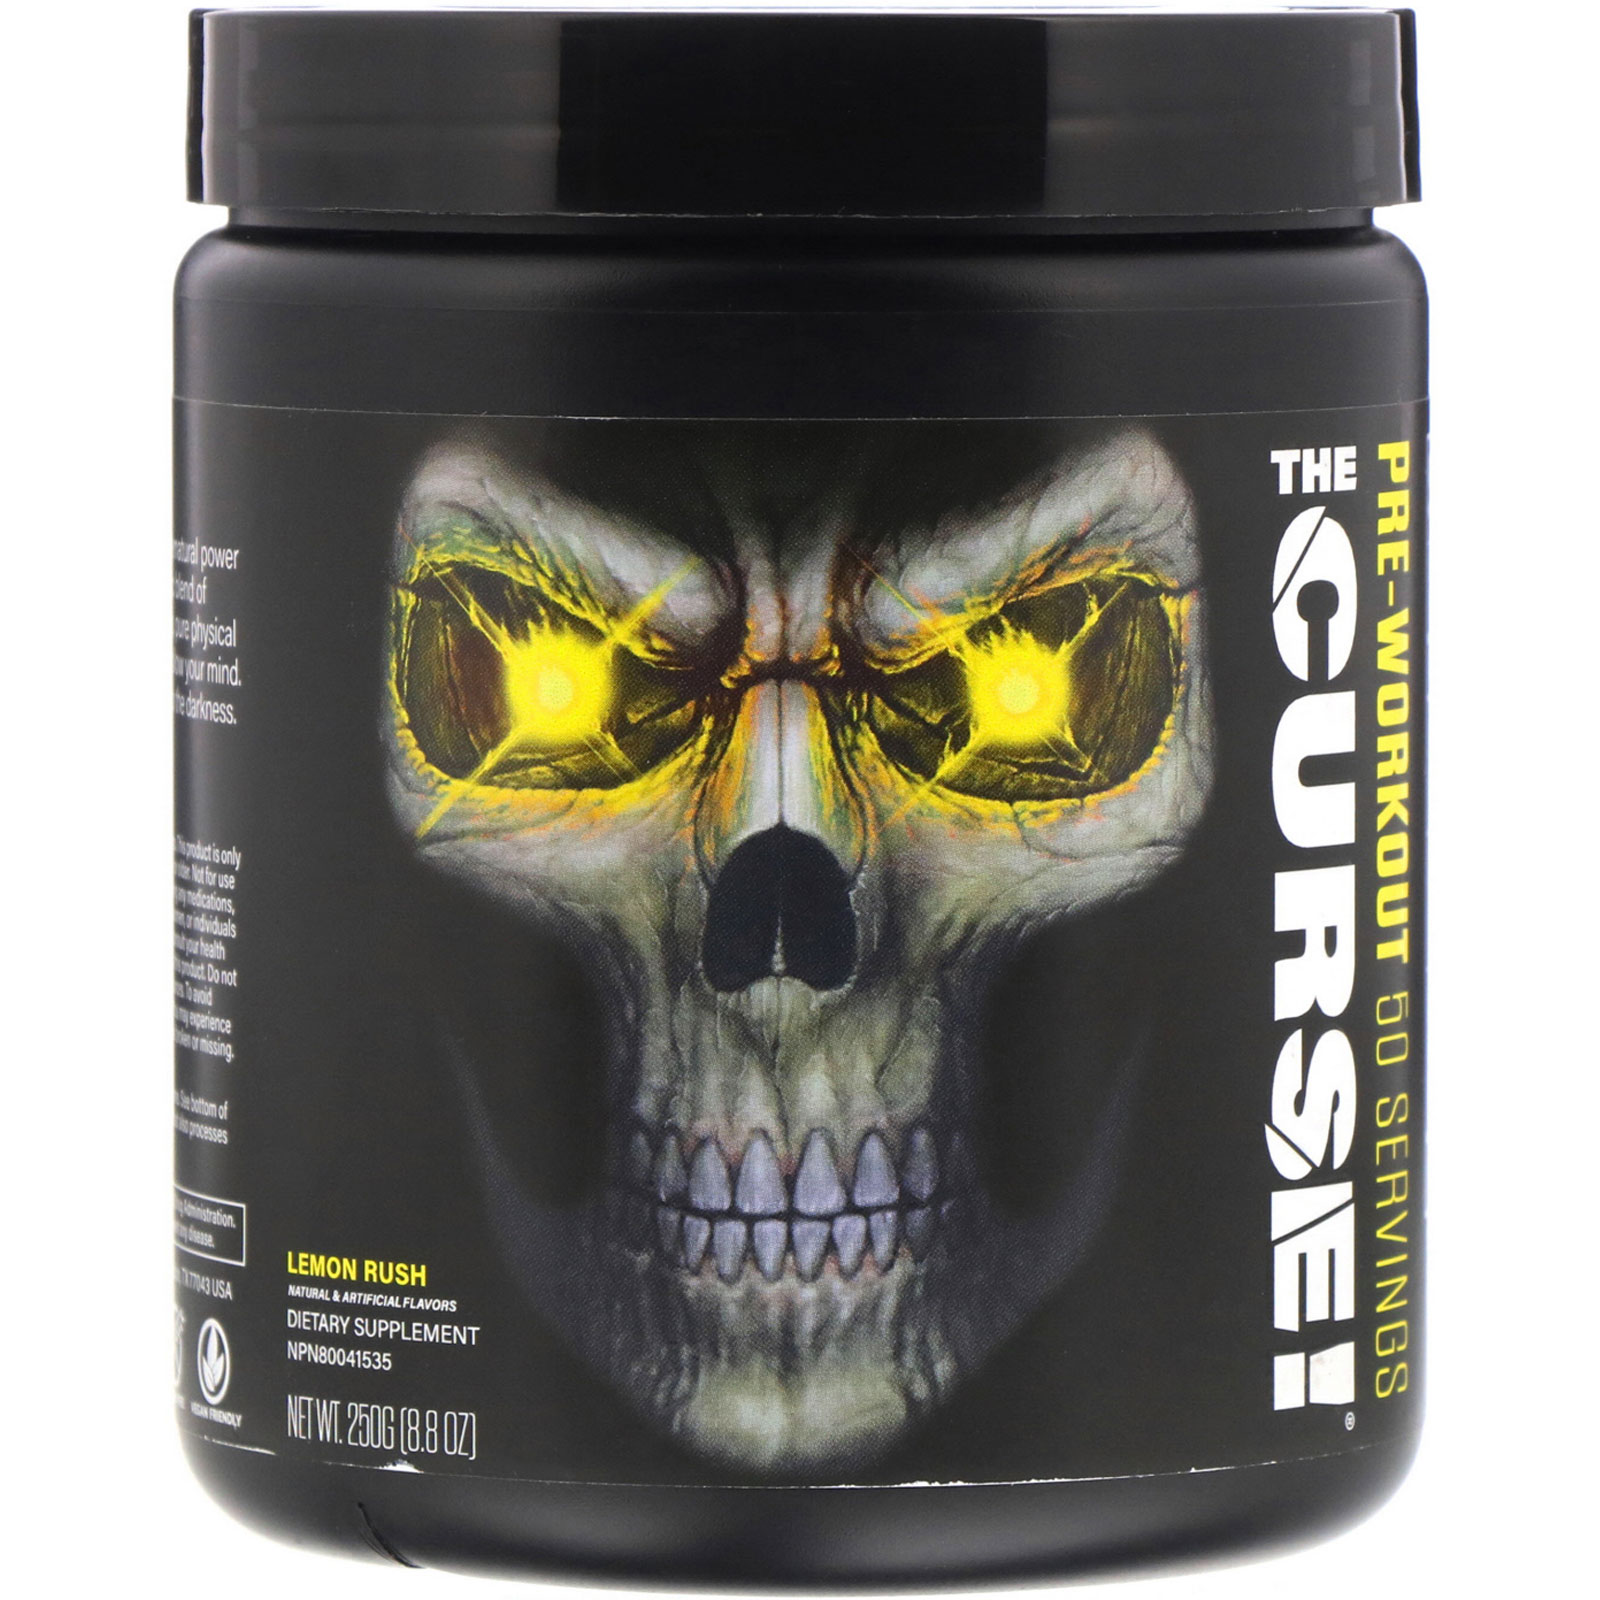 6 Day The One Pre Workout Review for Women